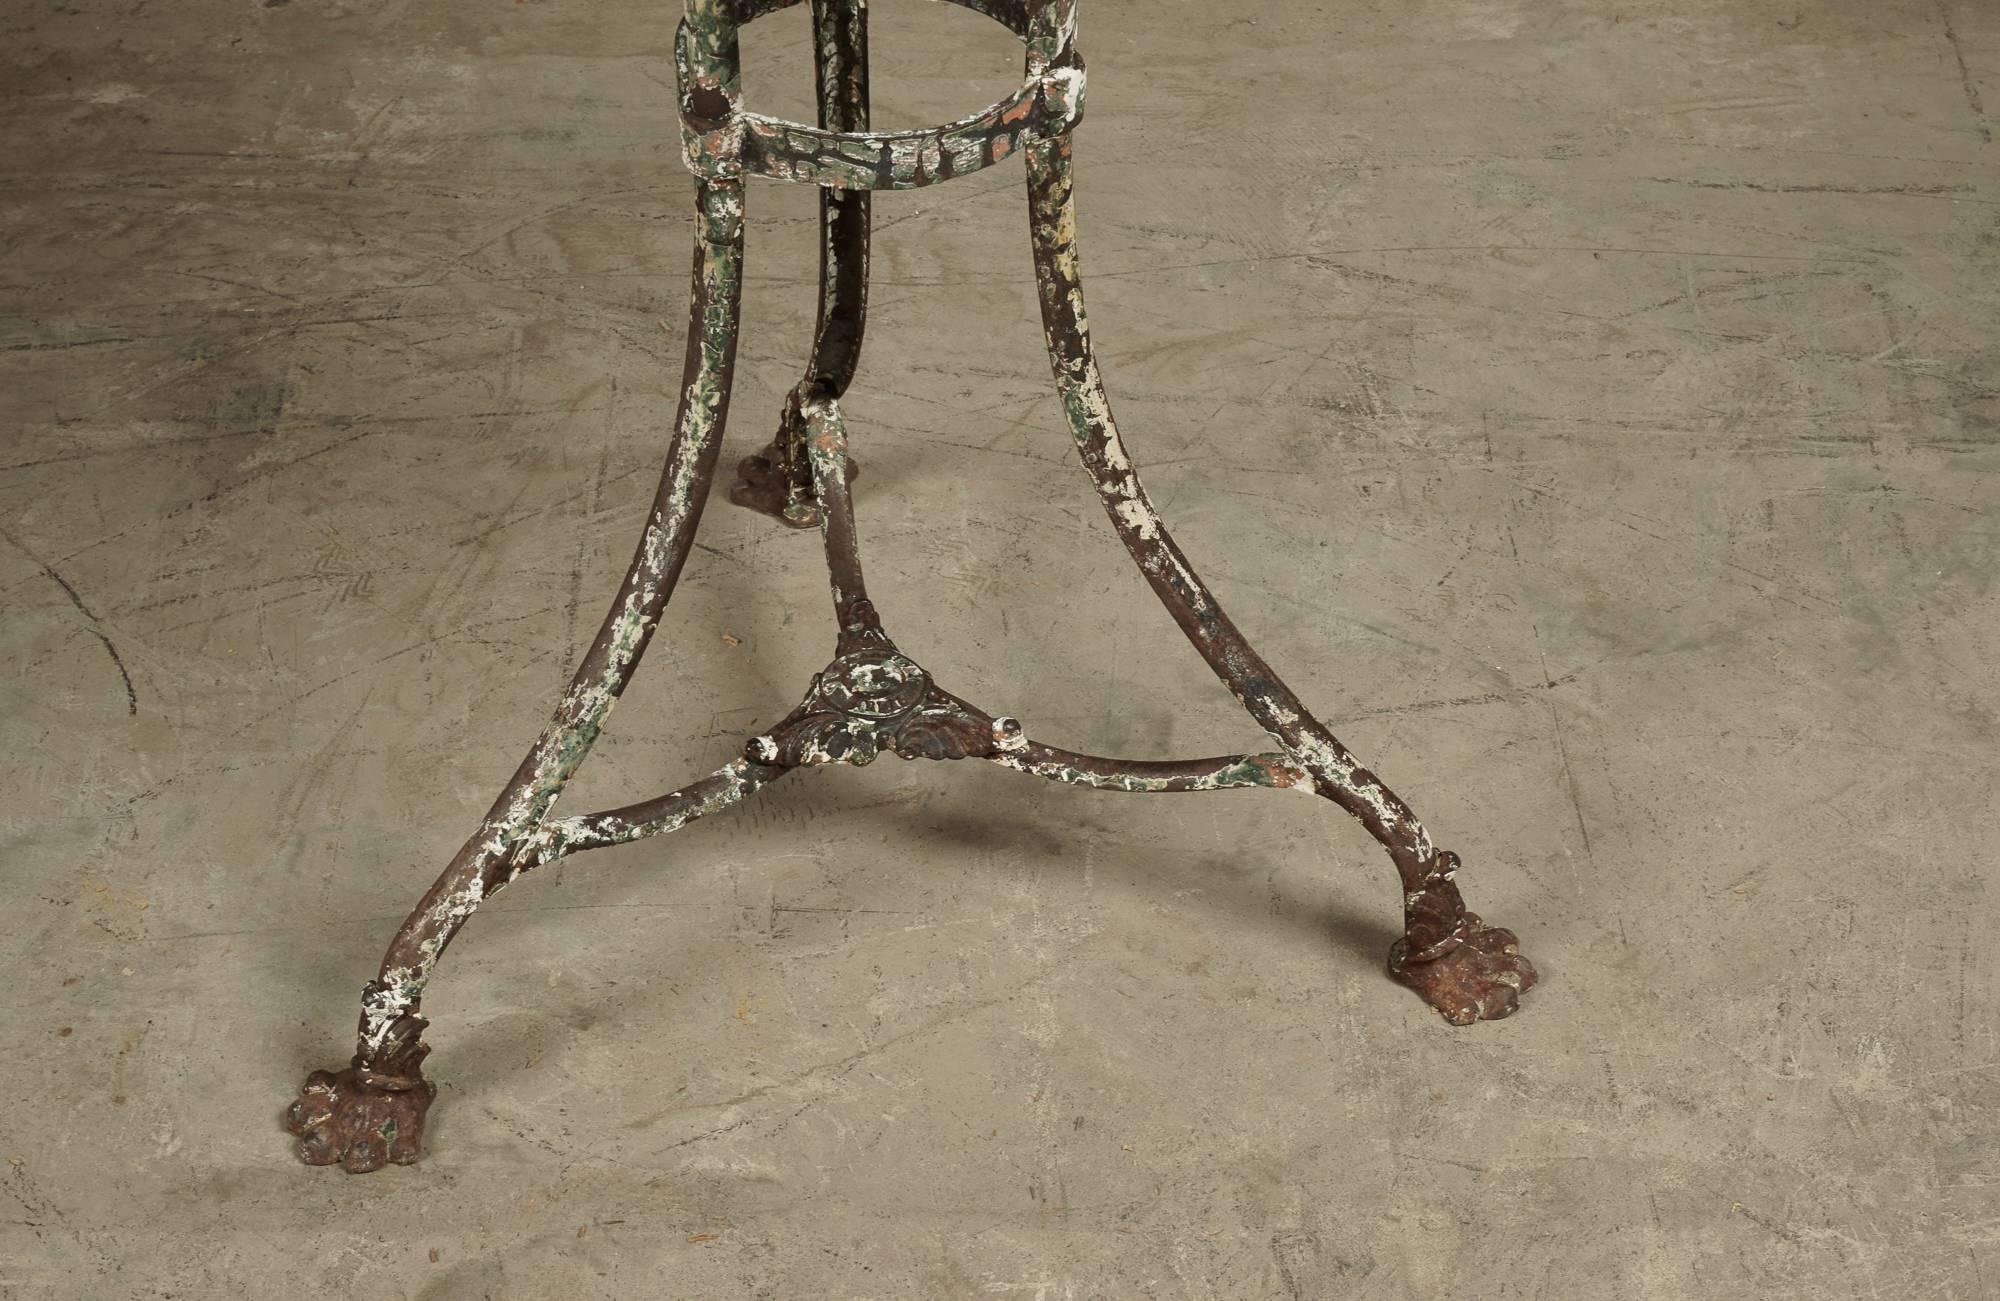 19th Century Bistro Table From Arras.  Traces of original paint with manufacturer's label on base.

